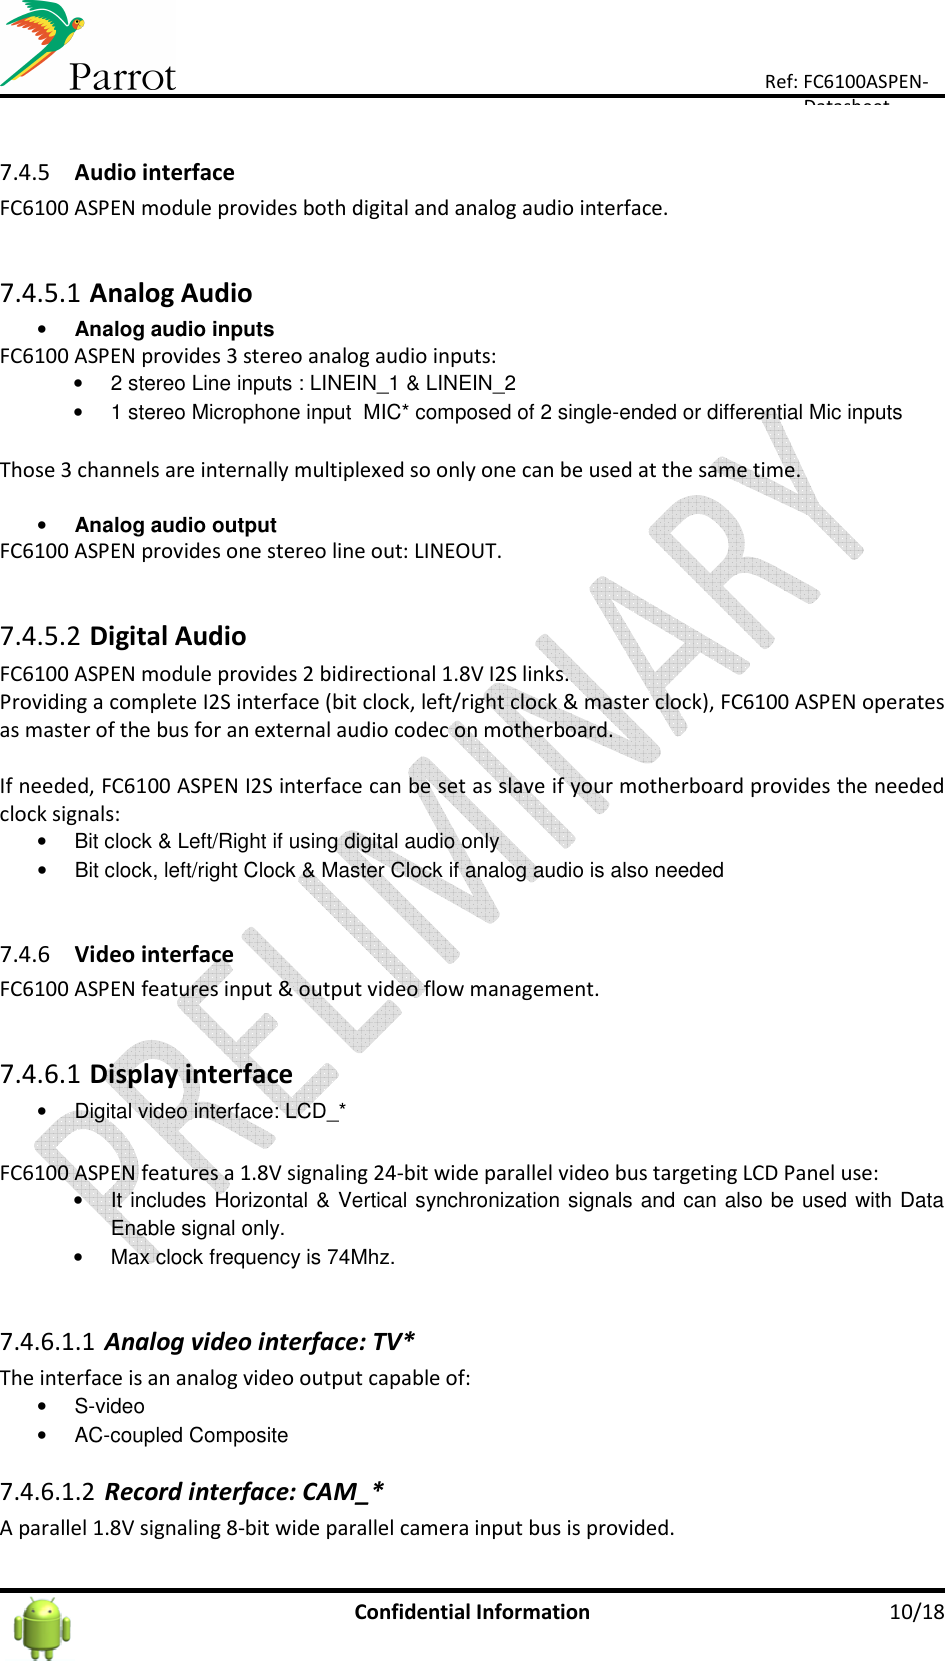      Confidential Information  10/18 Ref: FC6100ASPEN-Datasheet  7.4.5 Audio interface FC6100 ASPEN module provides both digital and analog audio interface.  7.4.5.1 Analog Audio • Analog audio inputs FC6100 ASPEN provides 3 stereo analog audio inputs: •  2 stereo Line inputs : LINEIN_1 &amp; LINEIN_2 •  1 stereo Microphone input  MIC* composed of 2 single-ended or differential Mic inputs   Those 3 channels are internally multiplexed so only one can be used at the same time.  • Analog audio output FC6100 ASPEN provides one stereo line out: LINEOUT.  7.4.5.2 Digital Audio FC6100 ASPEN module provides 2 bidirectional 1.8V I2S links. Providing a complete I2S interface (bit clock, left/right clock &amp; master clock), FC6100 ASPEN operates as master of the bus for an external audio codec on motherboard.  If needed, FC6100 ASPEN I2S interface can be set as slave if your motherboard provides the needed clock signals: •  Bit clock &amp; Left/Right if using digital audio only •  Bit clock, left/right Clock &amp; Master Clock if analog audio is also needed  7.4.6 Video interface FC6100 ASPEN features input &amp; output video flow management.  7.4.6.1 Display interface •  Digital video interface: LCD_*  FC6100 ASPEN features a 1.8V signaling 24-bit wide parallel video bus targeting LCD Panel use: •  It includes Horizontal &amp; Vertical synchronization signals and can also be used with Data Enable signal only. •  Max clock frequency is 74Mhz.  7.4.6.1.1 Analog video interface: TV* The interface is an analog video output capable of: •  S-video •  AC-coupled Composite 7.4.6.1.2 Record interface: CAM_* A parallel 1.8V signaling 8-bit wide parallel camera input bus is provided. 